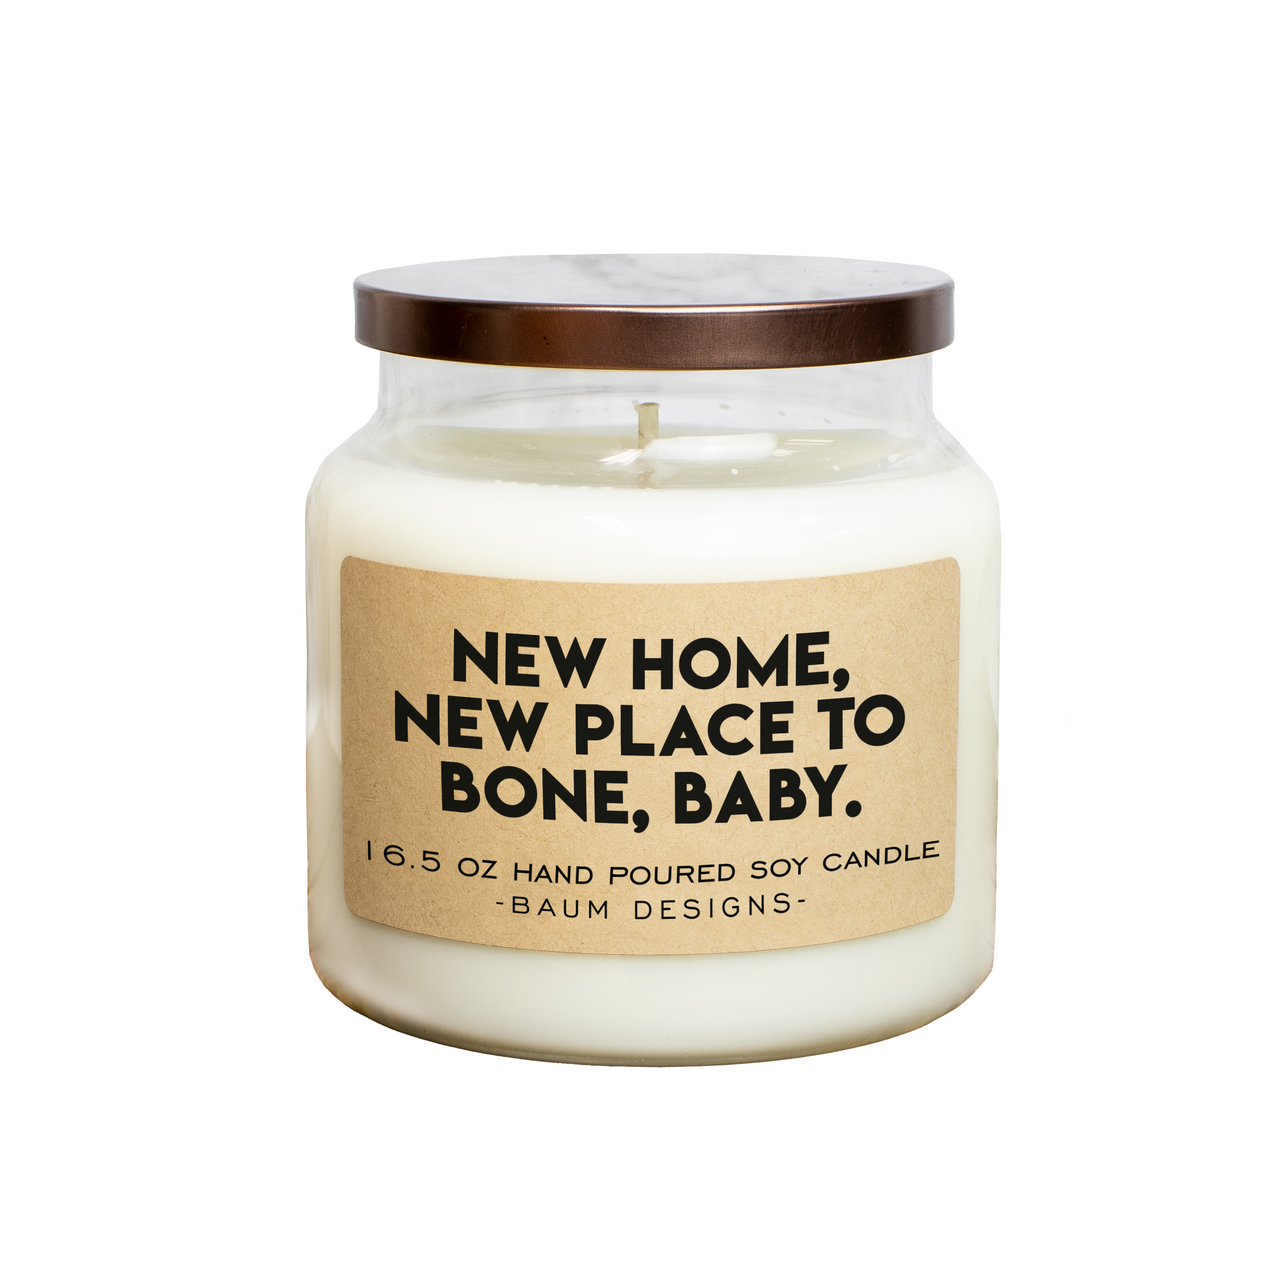 New Home, New Place To Bone Baby Soy Candle Baum Designs